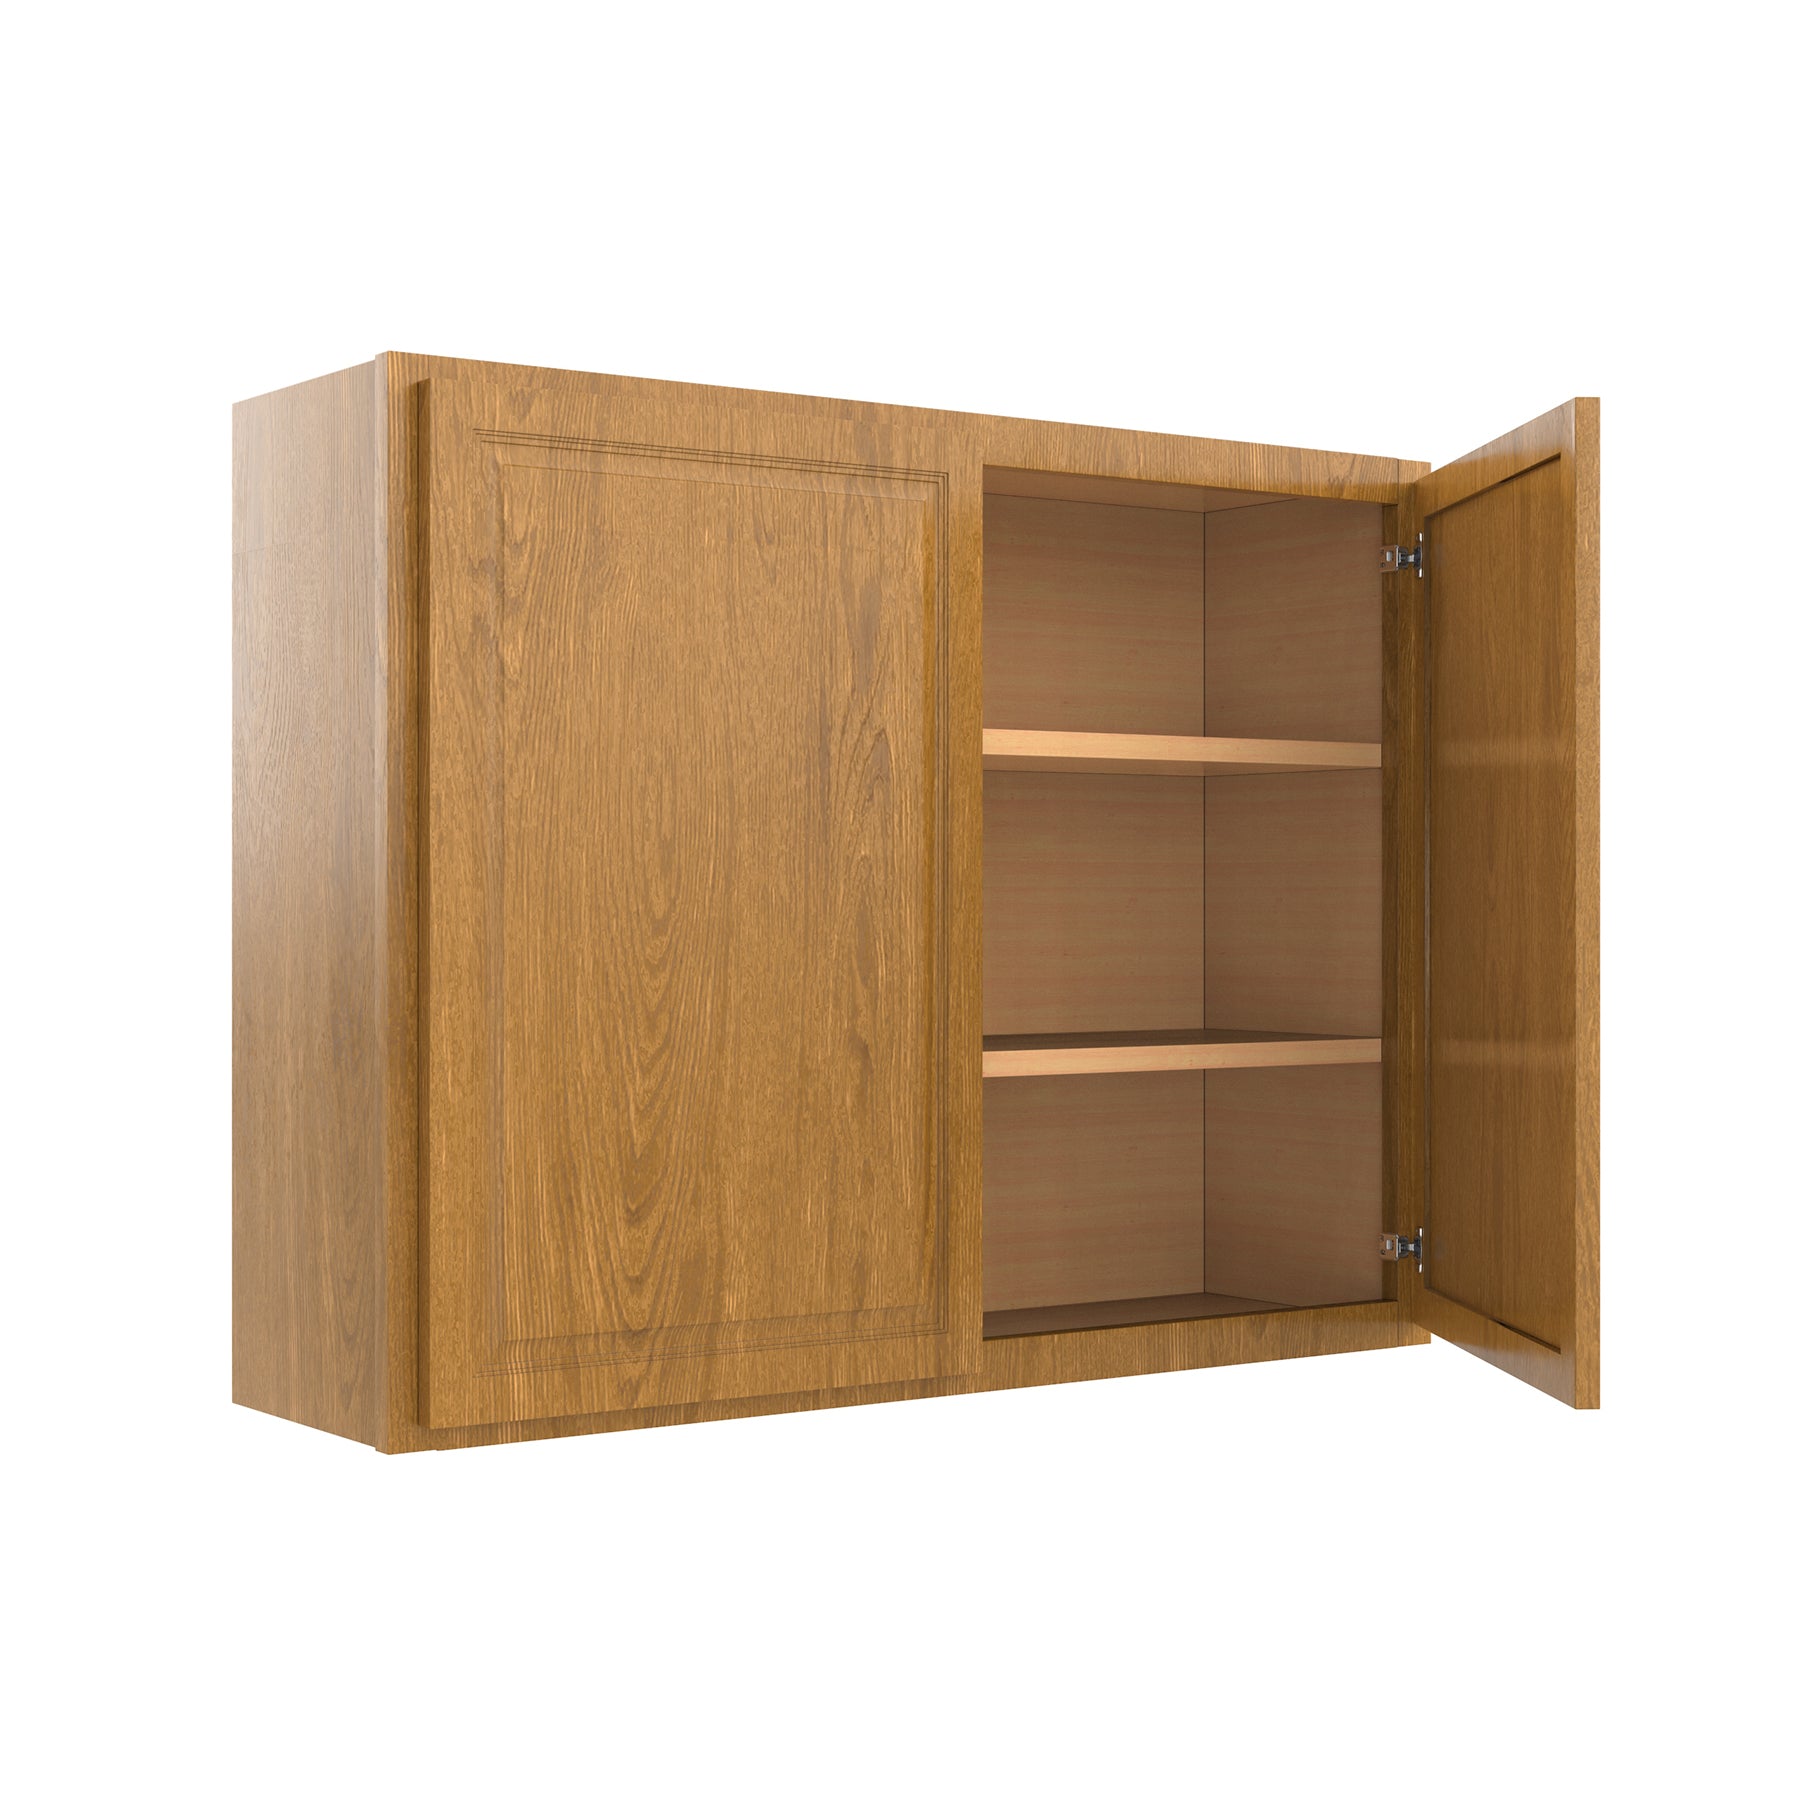 Country Oak 39"W x 30"H Wall Cabinet